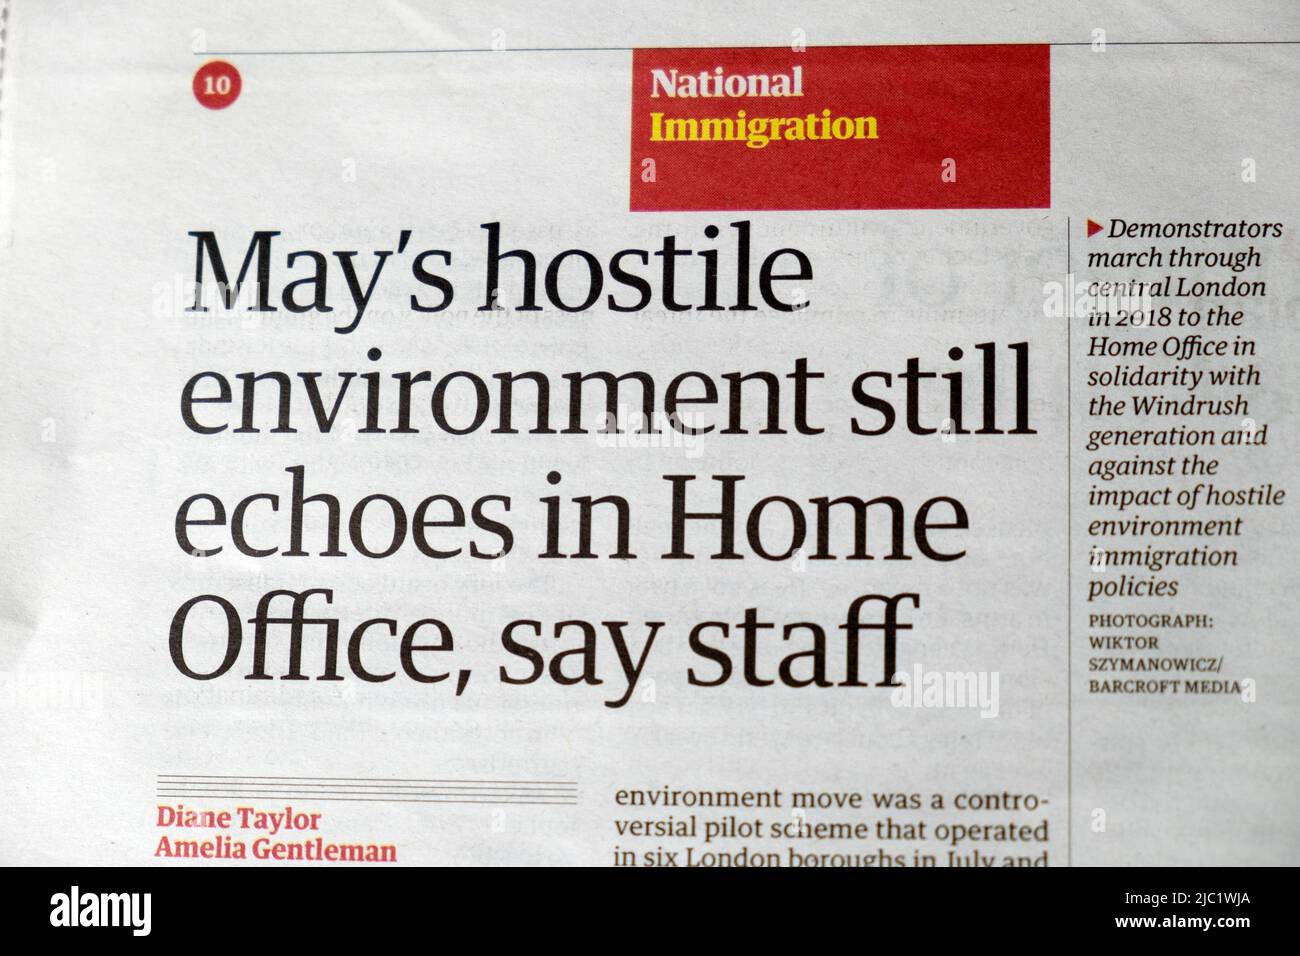 Theresa 'May's hostile environment still echoes in Home Office, say staff' Guardian newspaper headline Immigration article clipping London UK   2022 Stock Photo